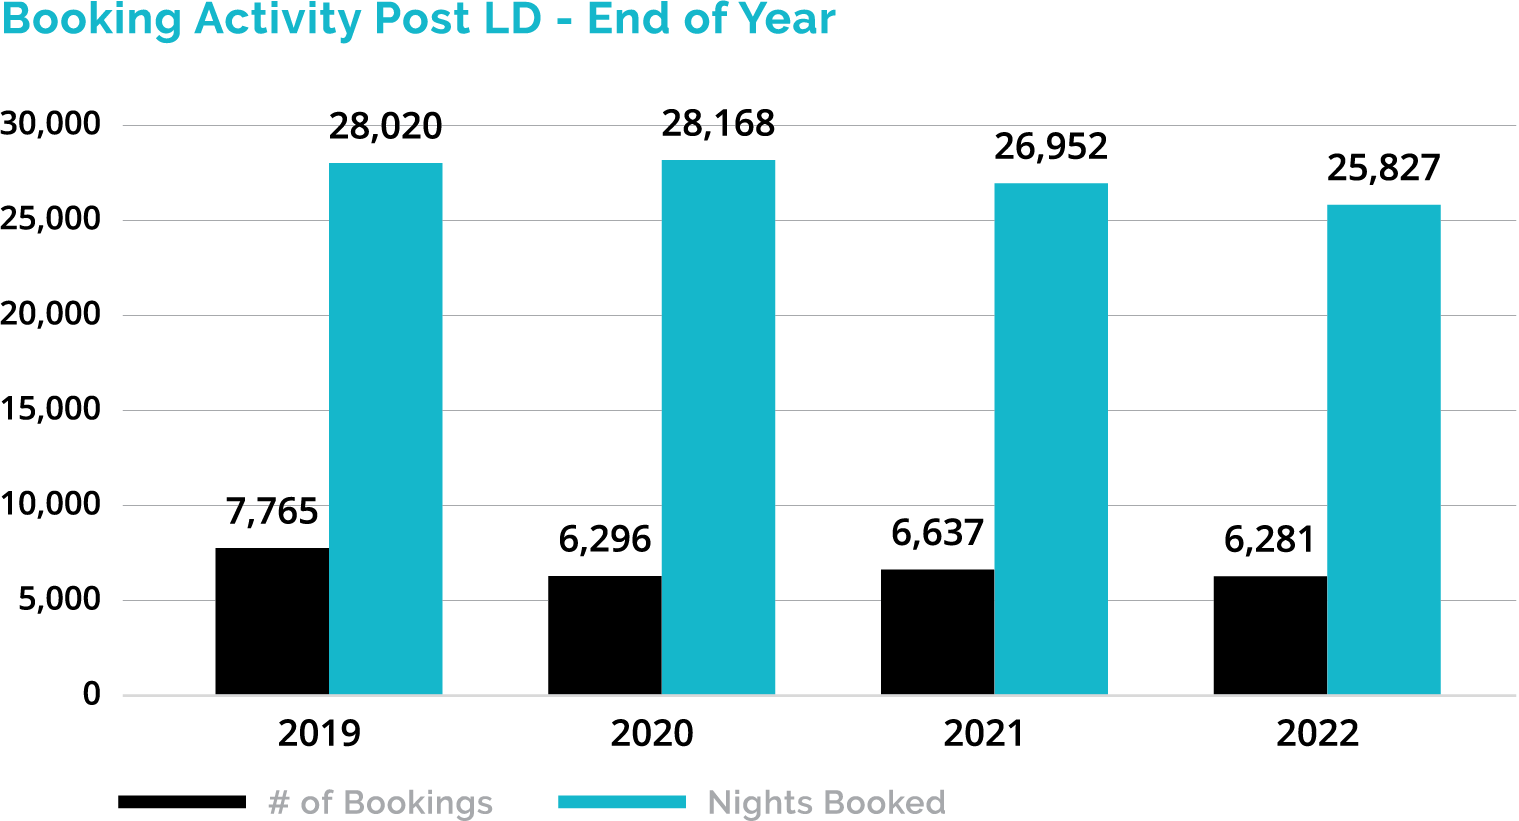 Booking Activity Post LD - End of Year